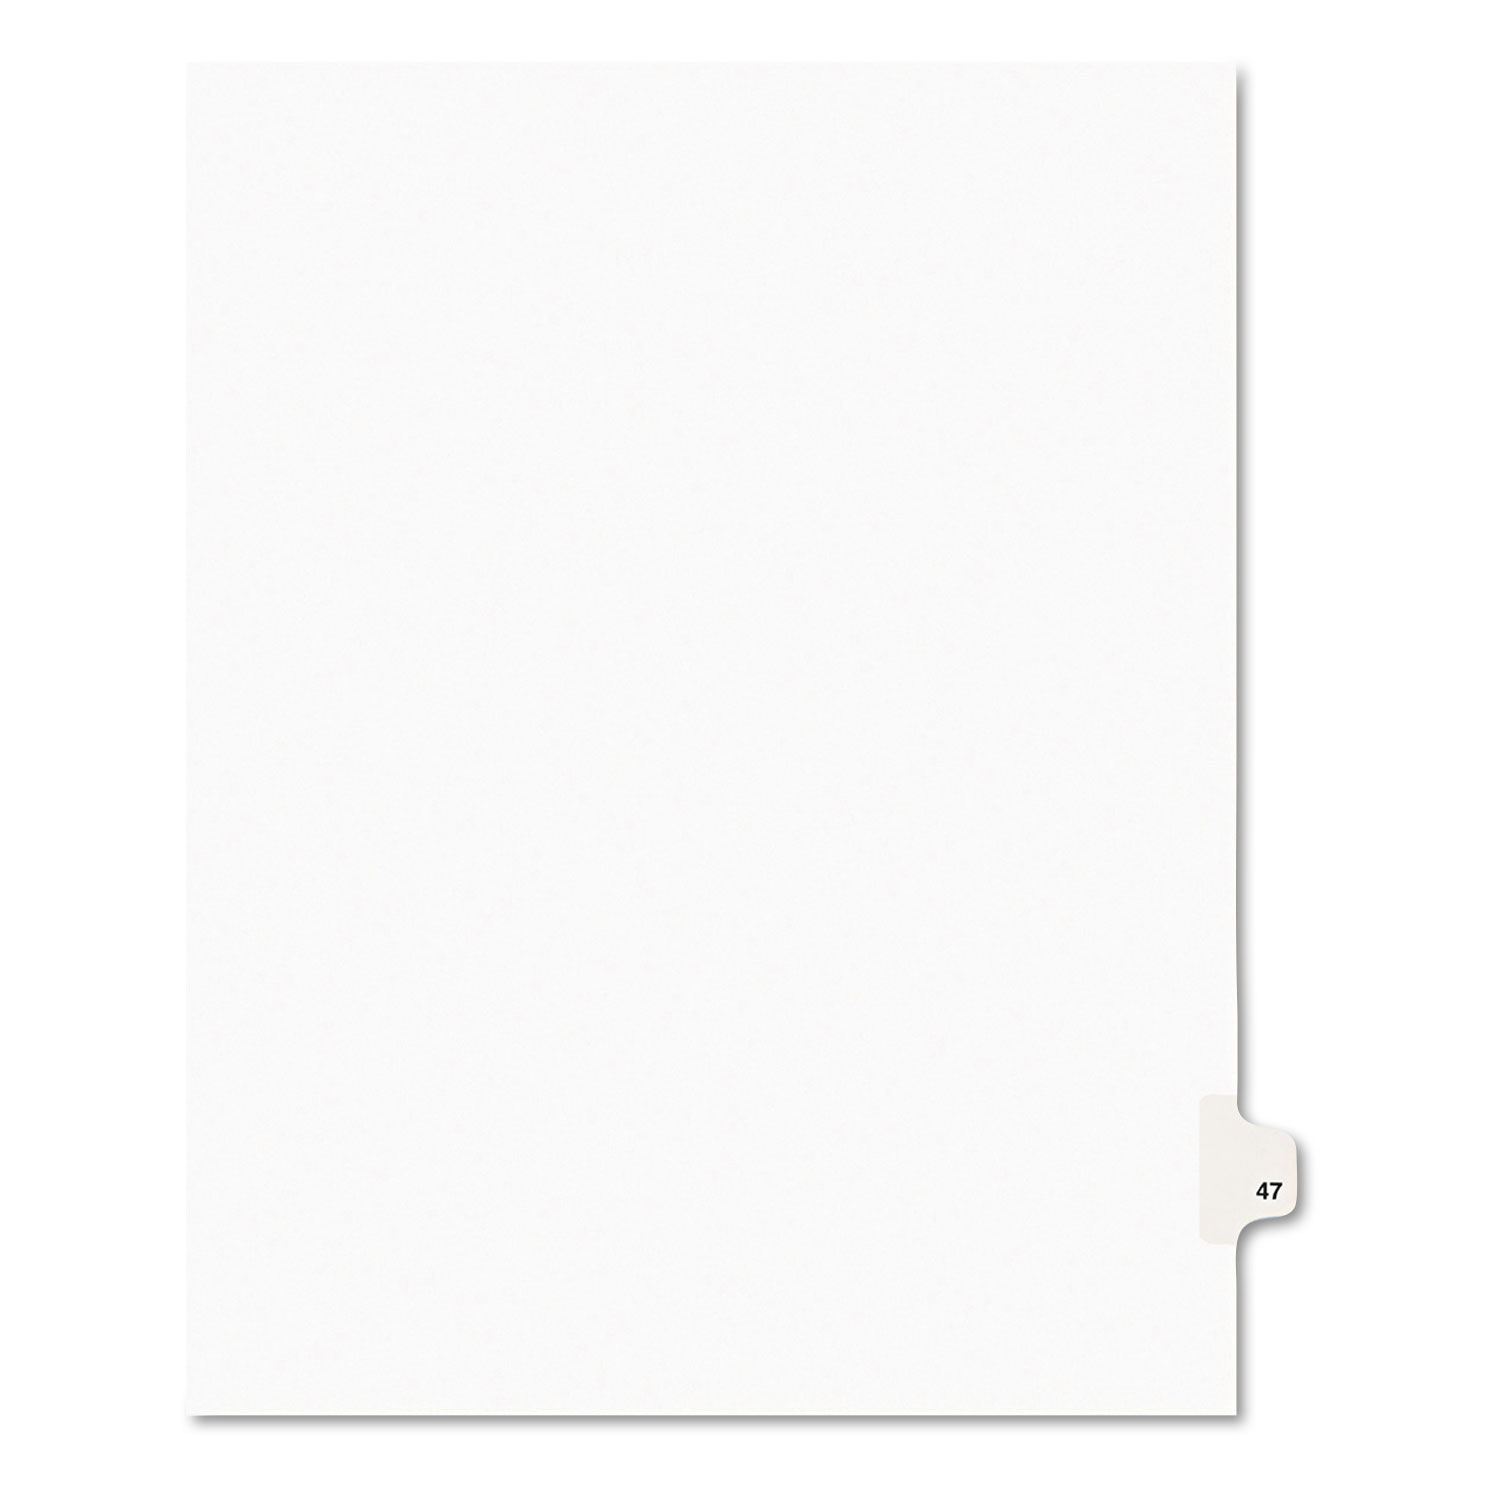  Avery 01047 Preprinted Legal Exhibit Side Tab Index Dividers, Avery Style, 10-Tab, 47, 11 x 8.5, White, 25/Pack (AVE01047) 